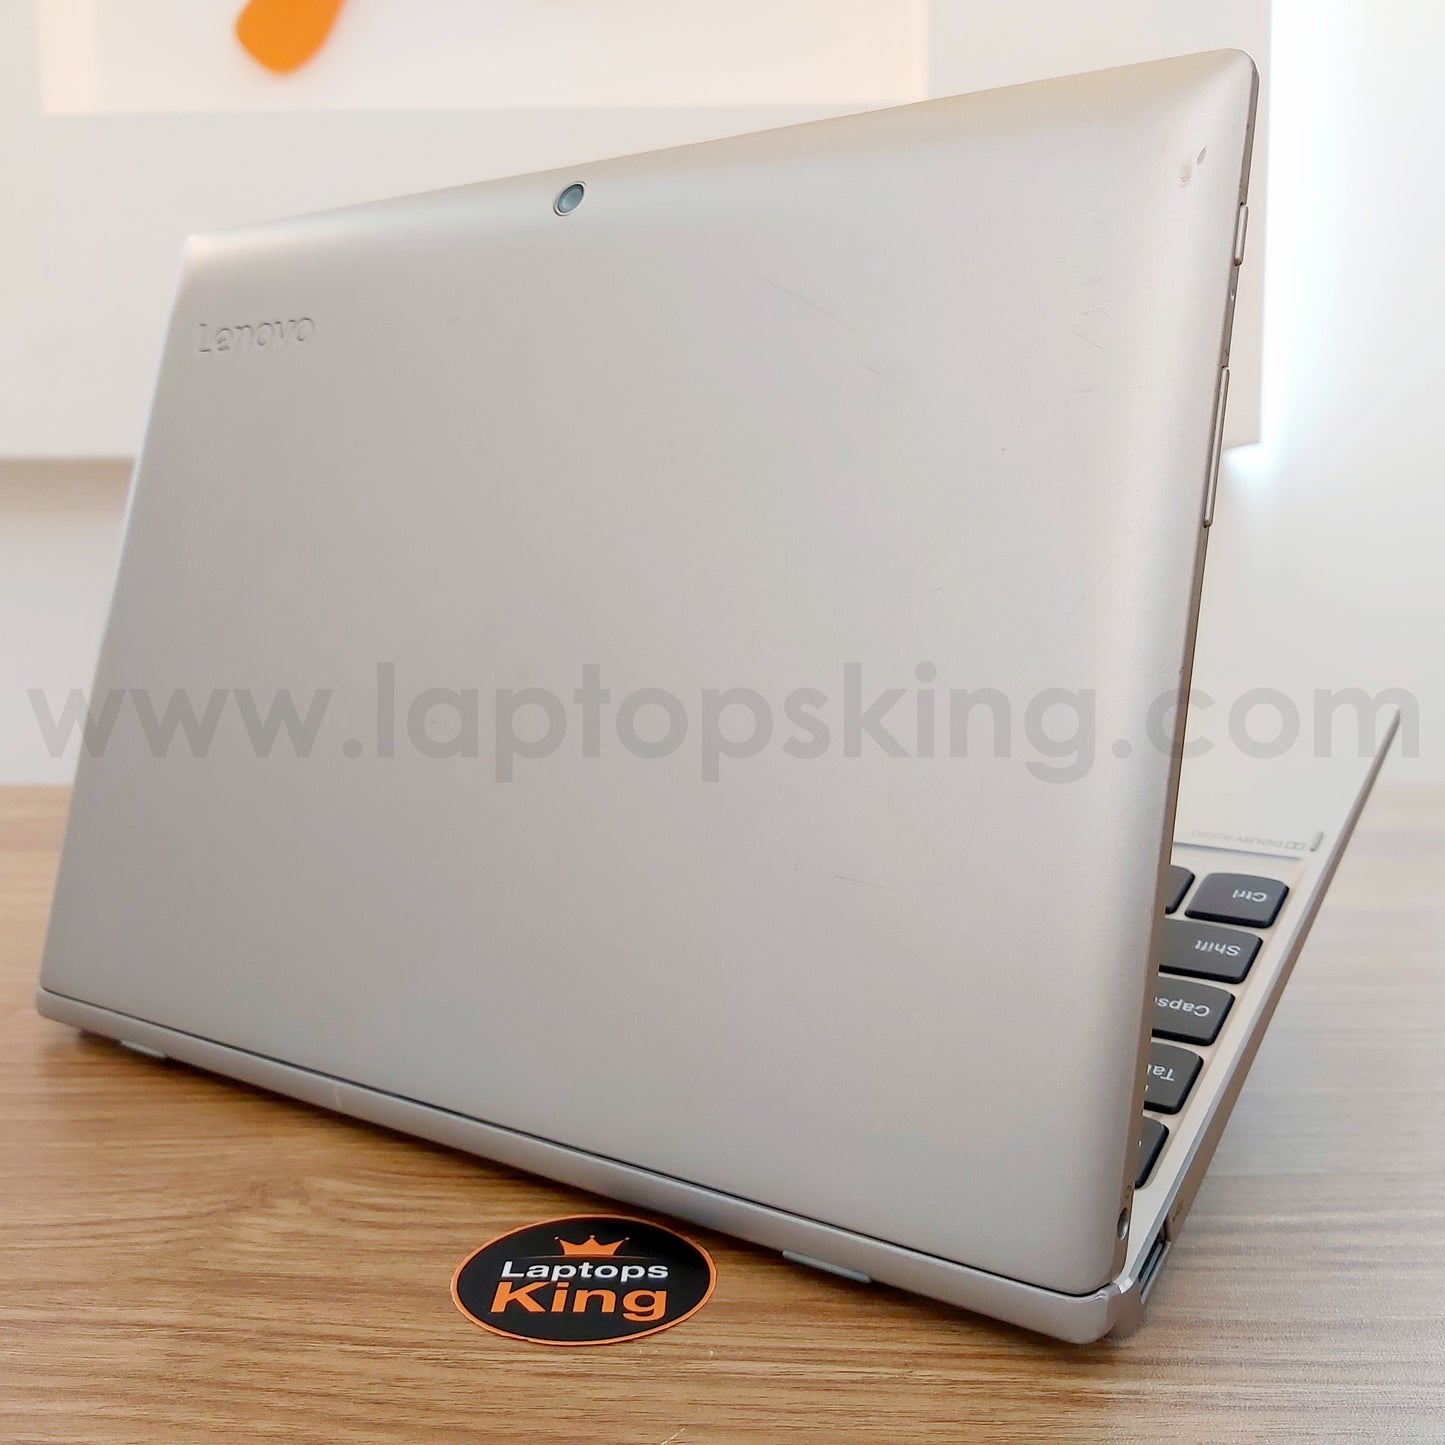 Lenovo IdeaPad 80xf 2in1 Laptop (Used Very Clean)